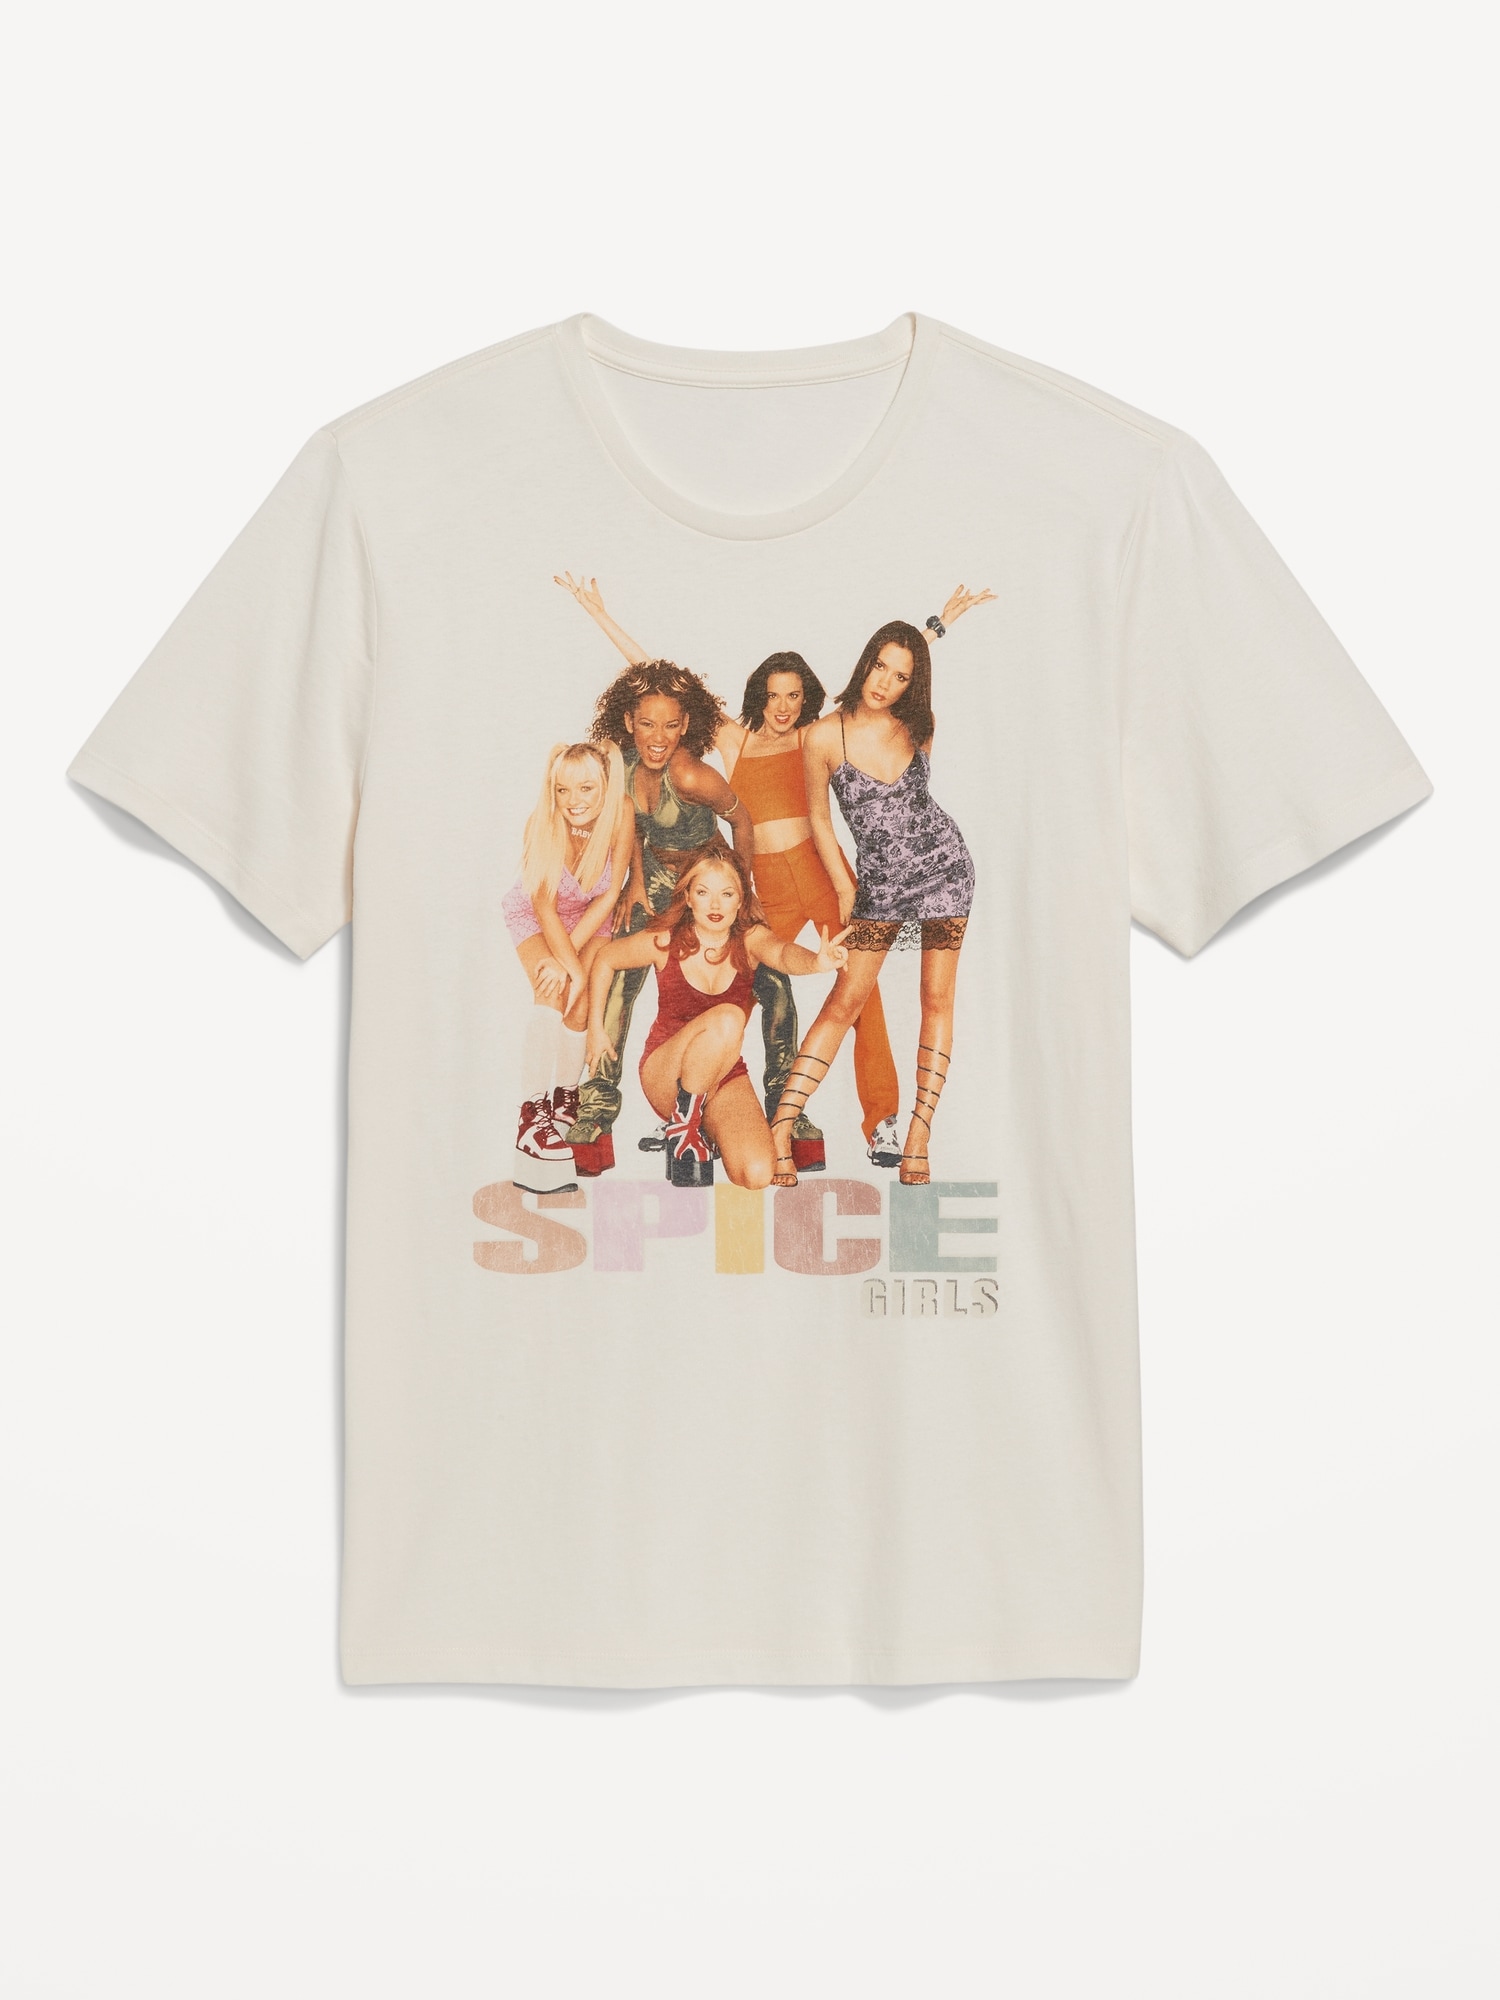 Spice Girls© Gender-Neutral T-Shirt for Adults